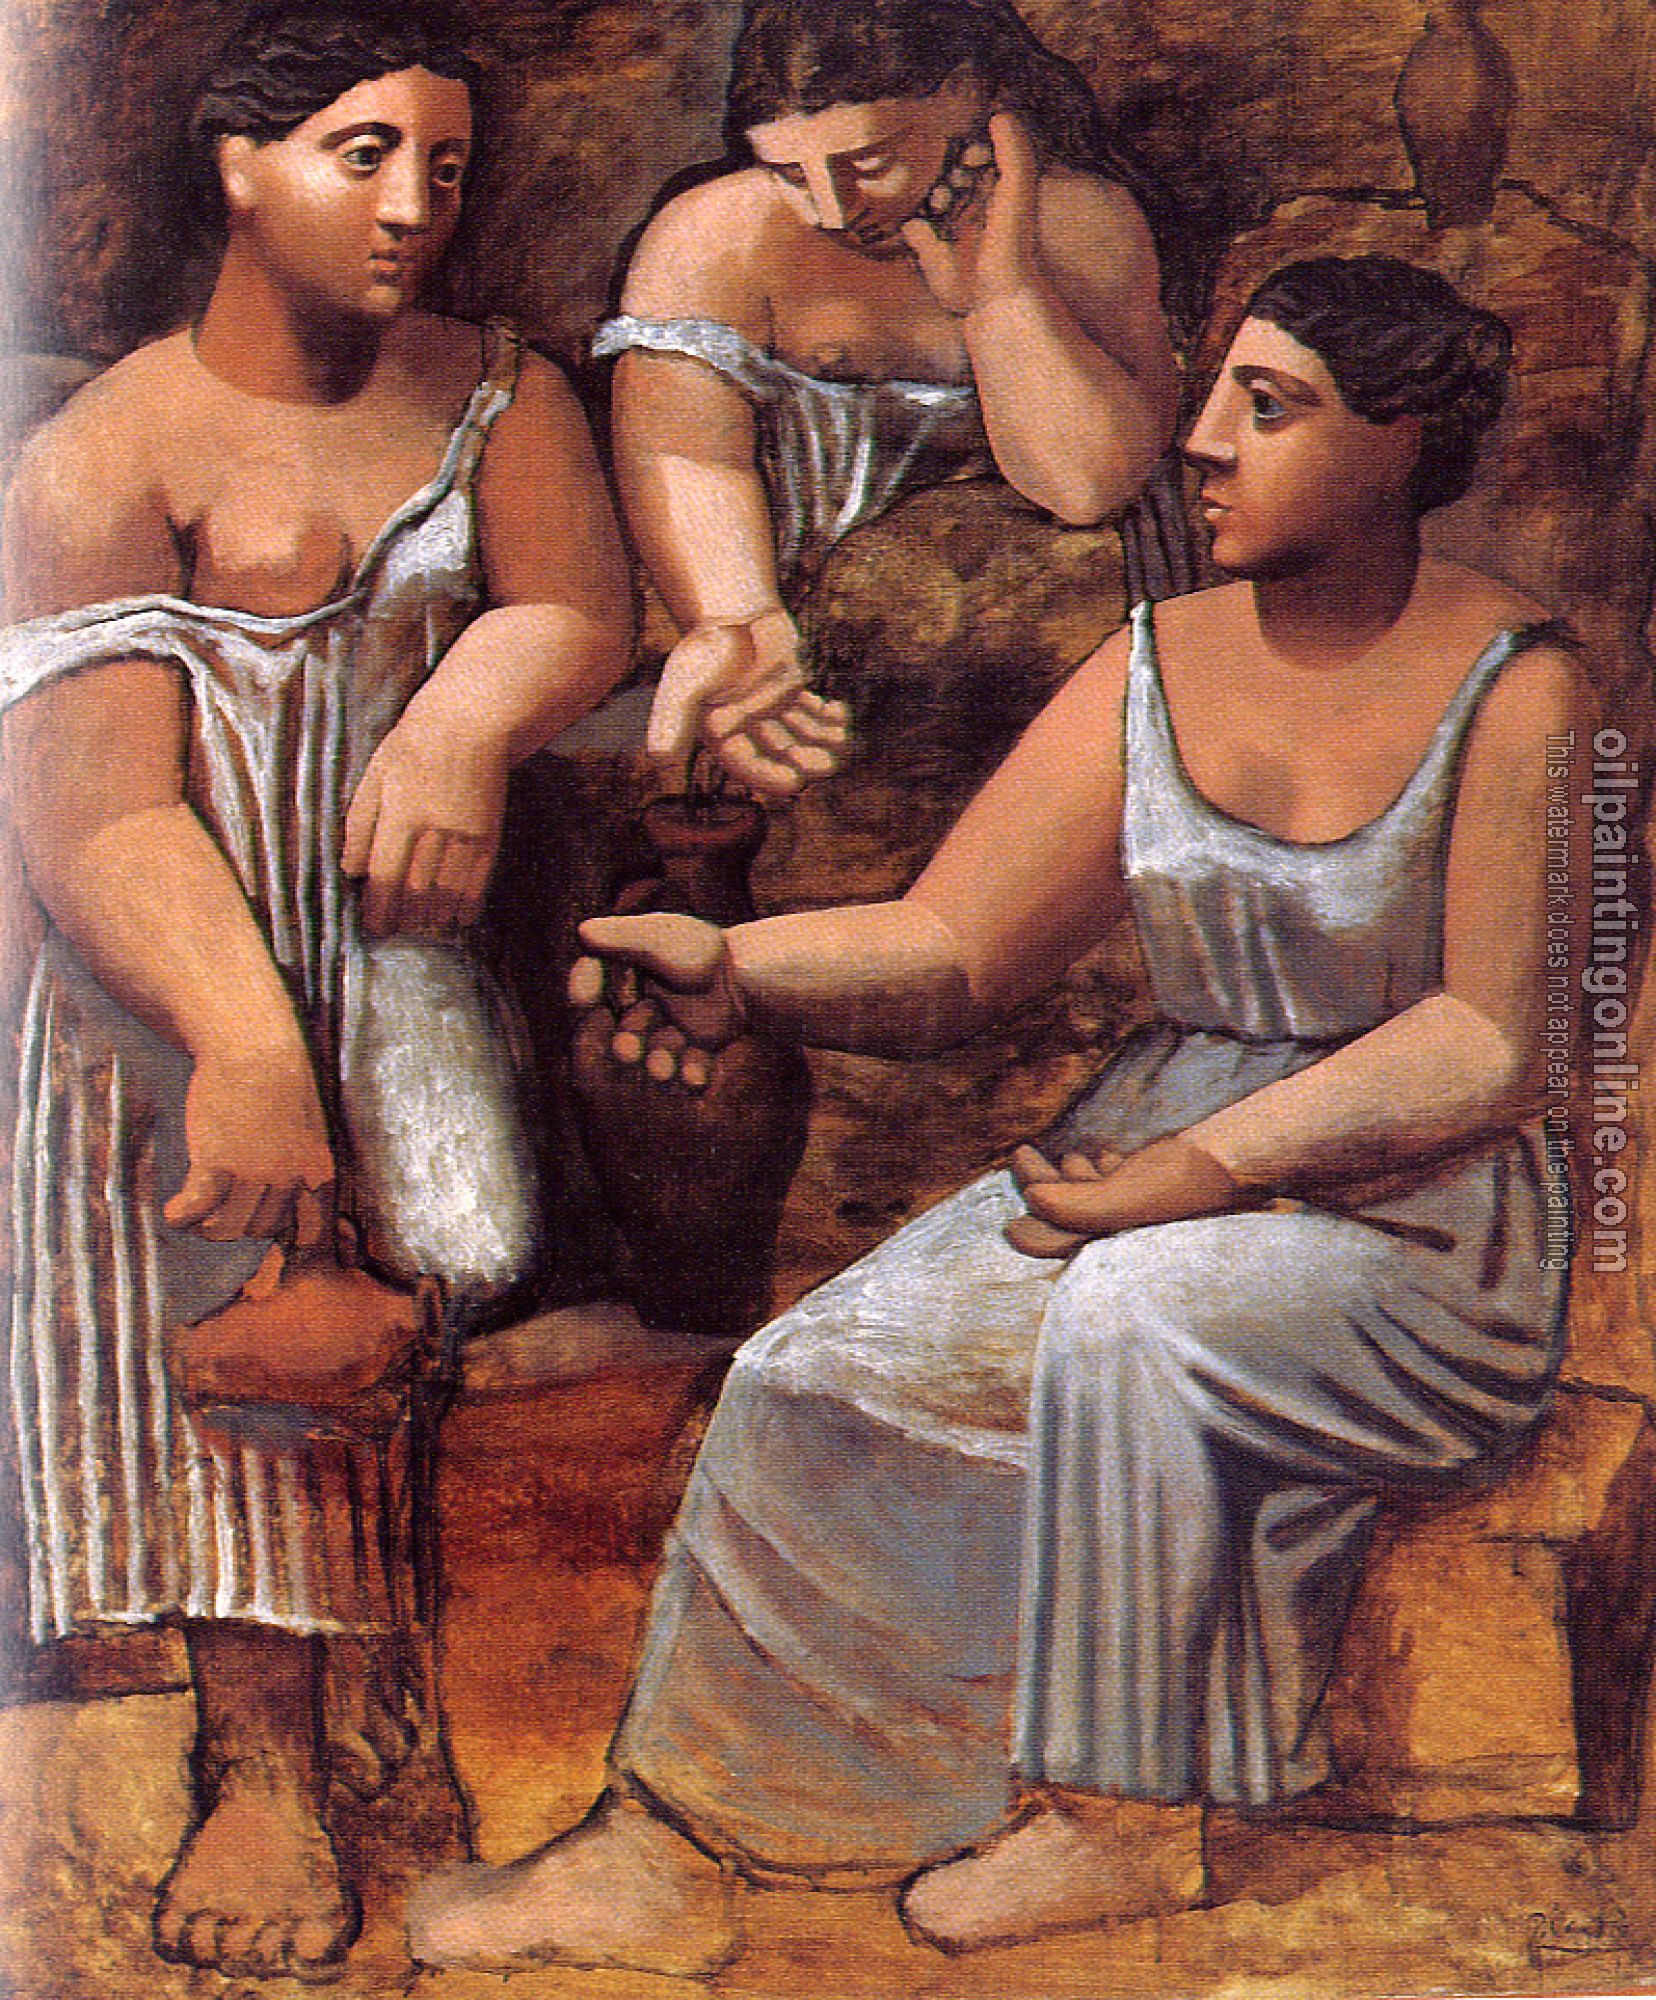 Picasso, Pablo - three women at the well